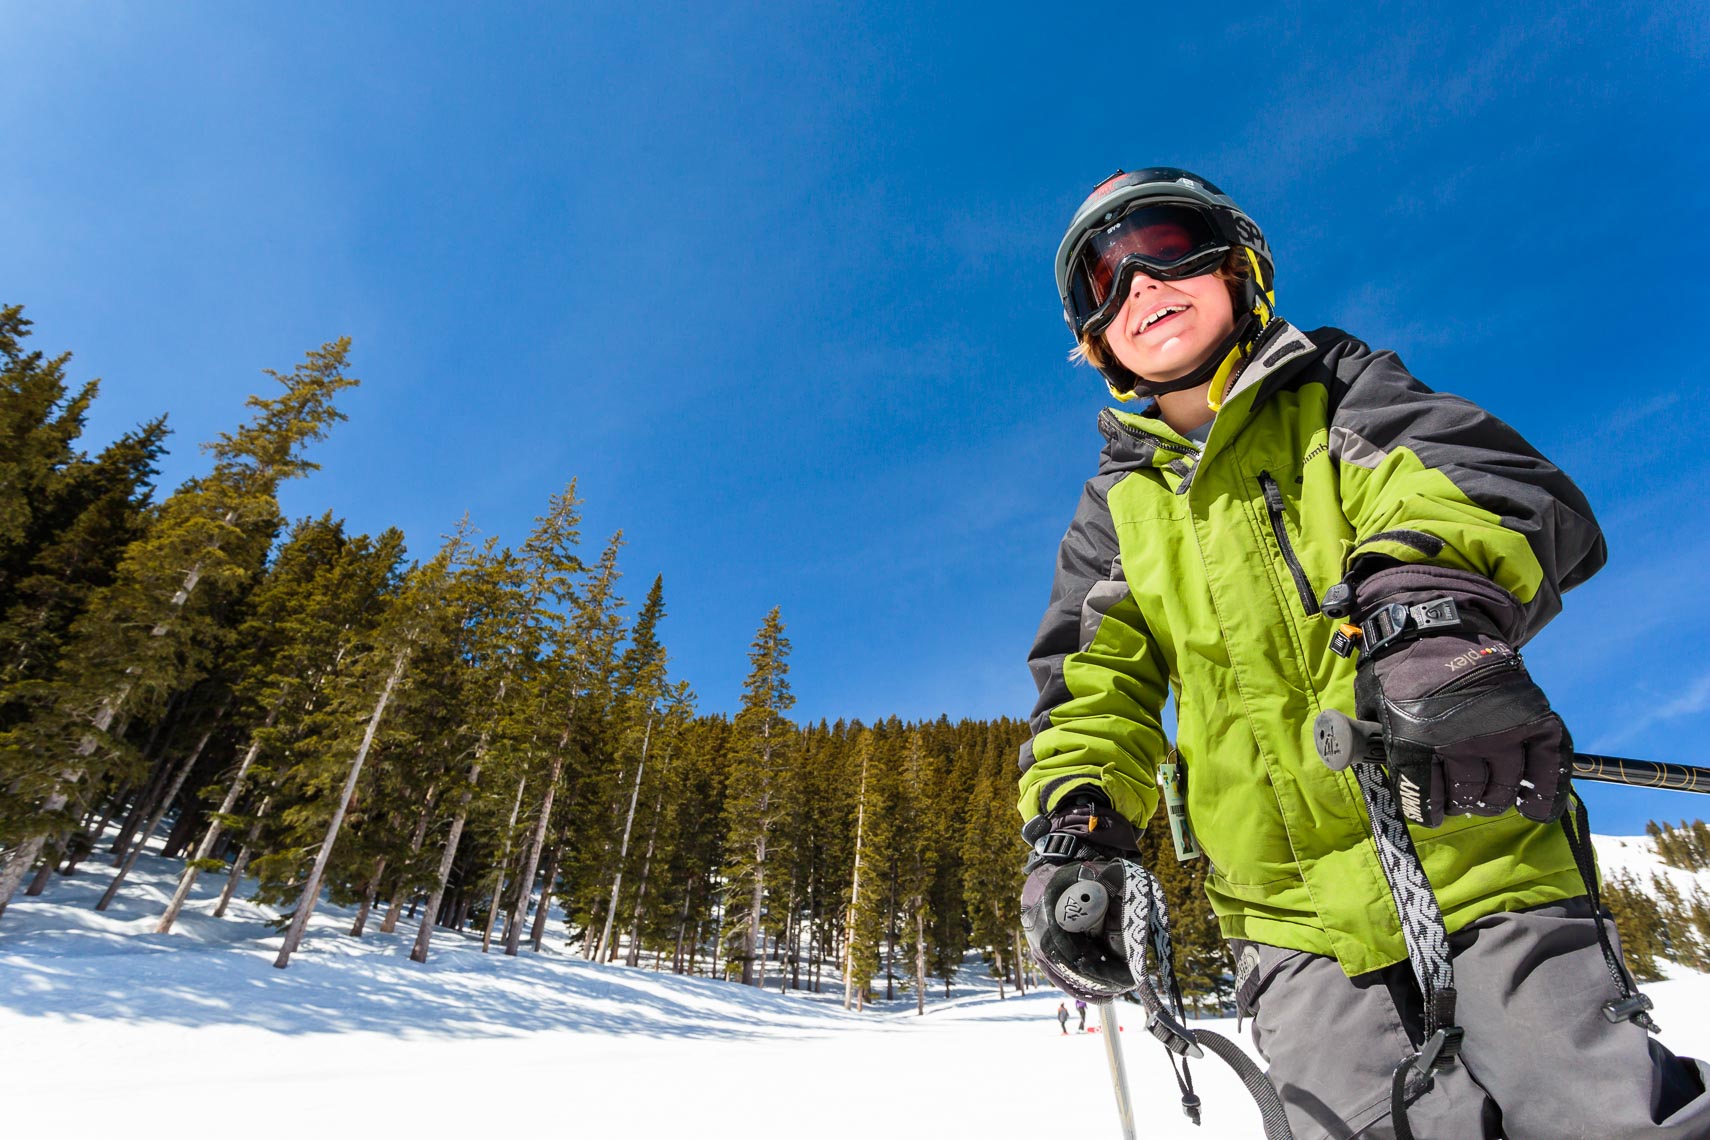 Young Skier at Taos Ski Valley in New Mexico | Michael DeYoung